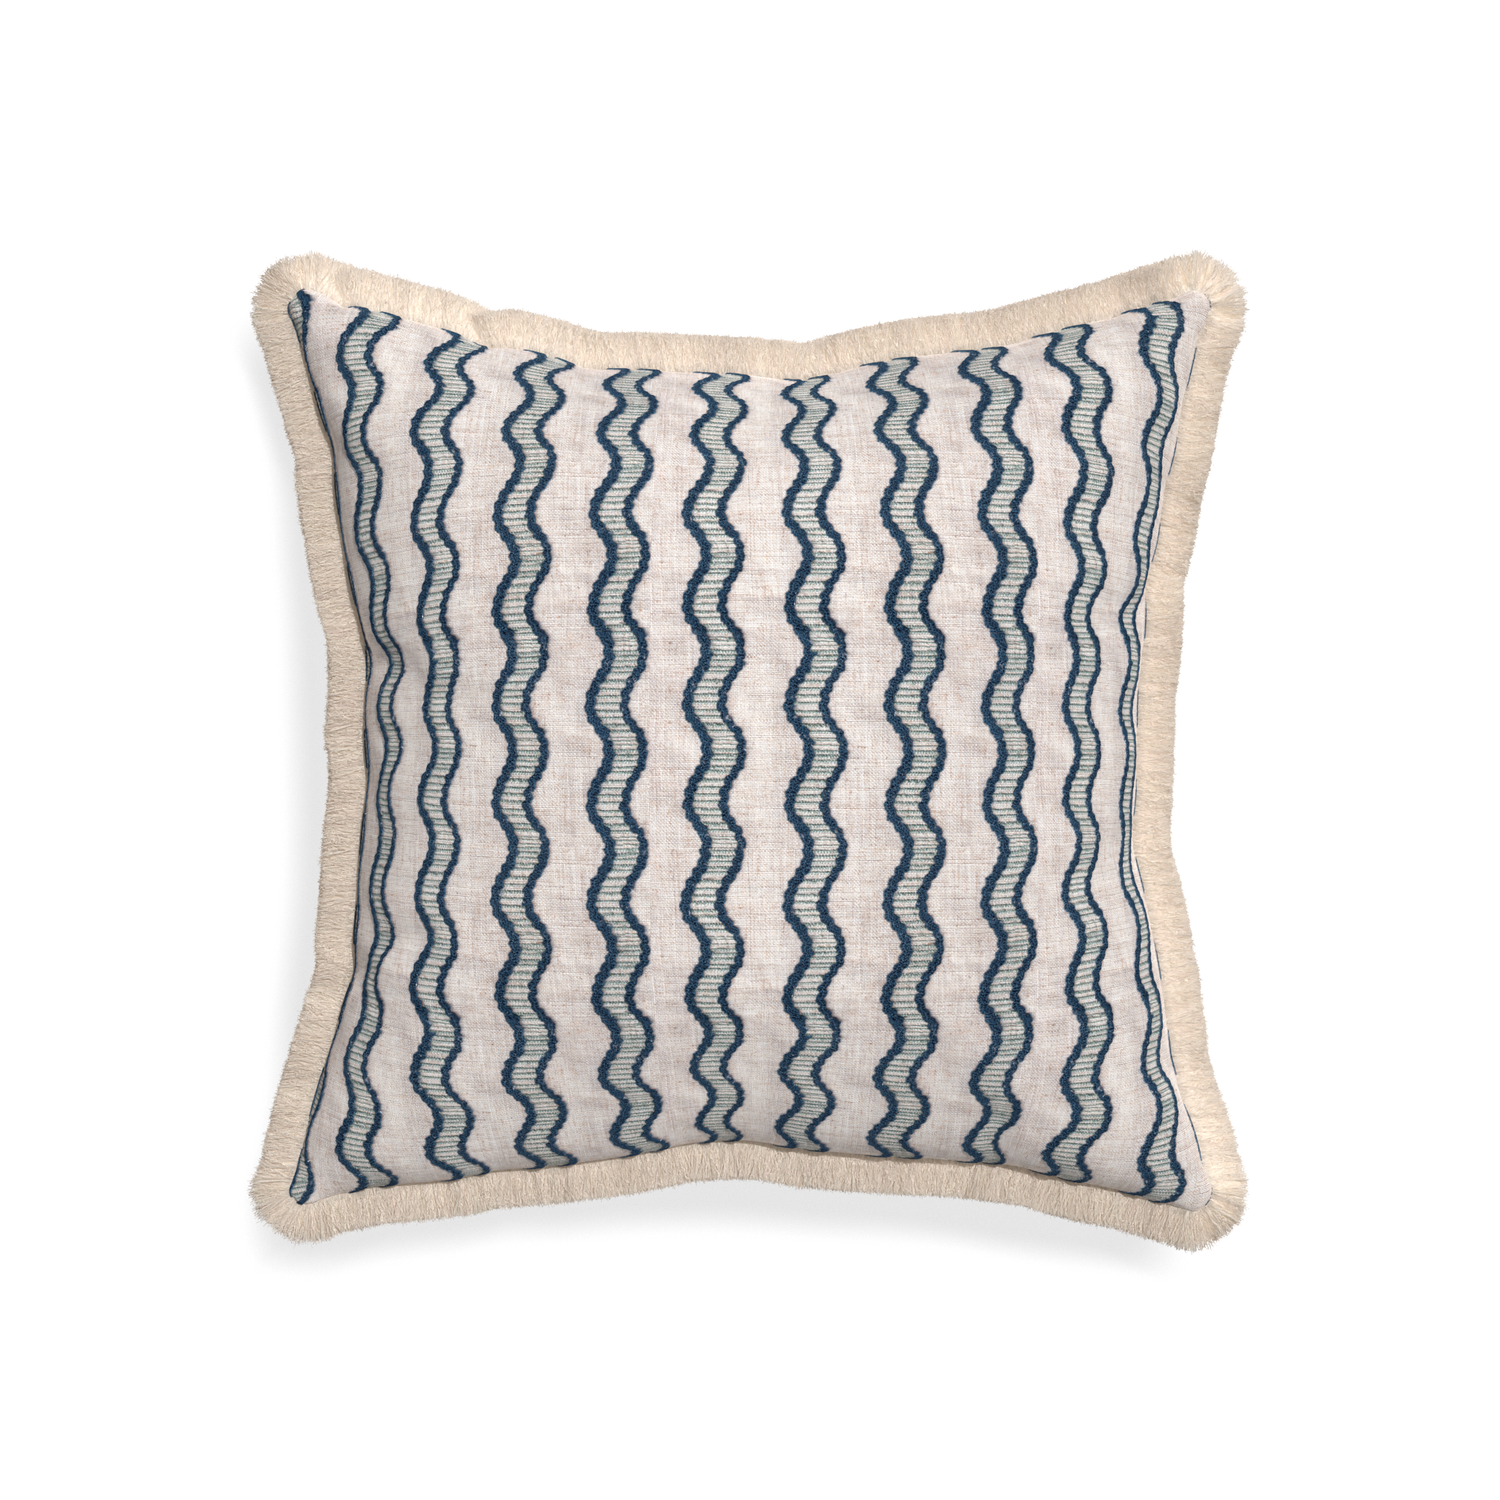 20-square beatrice custom embroidered wavepillow with cream fringe on white background